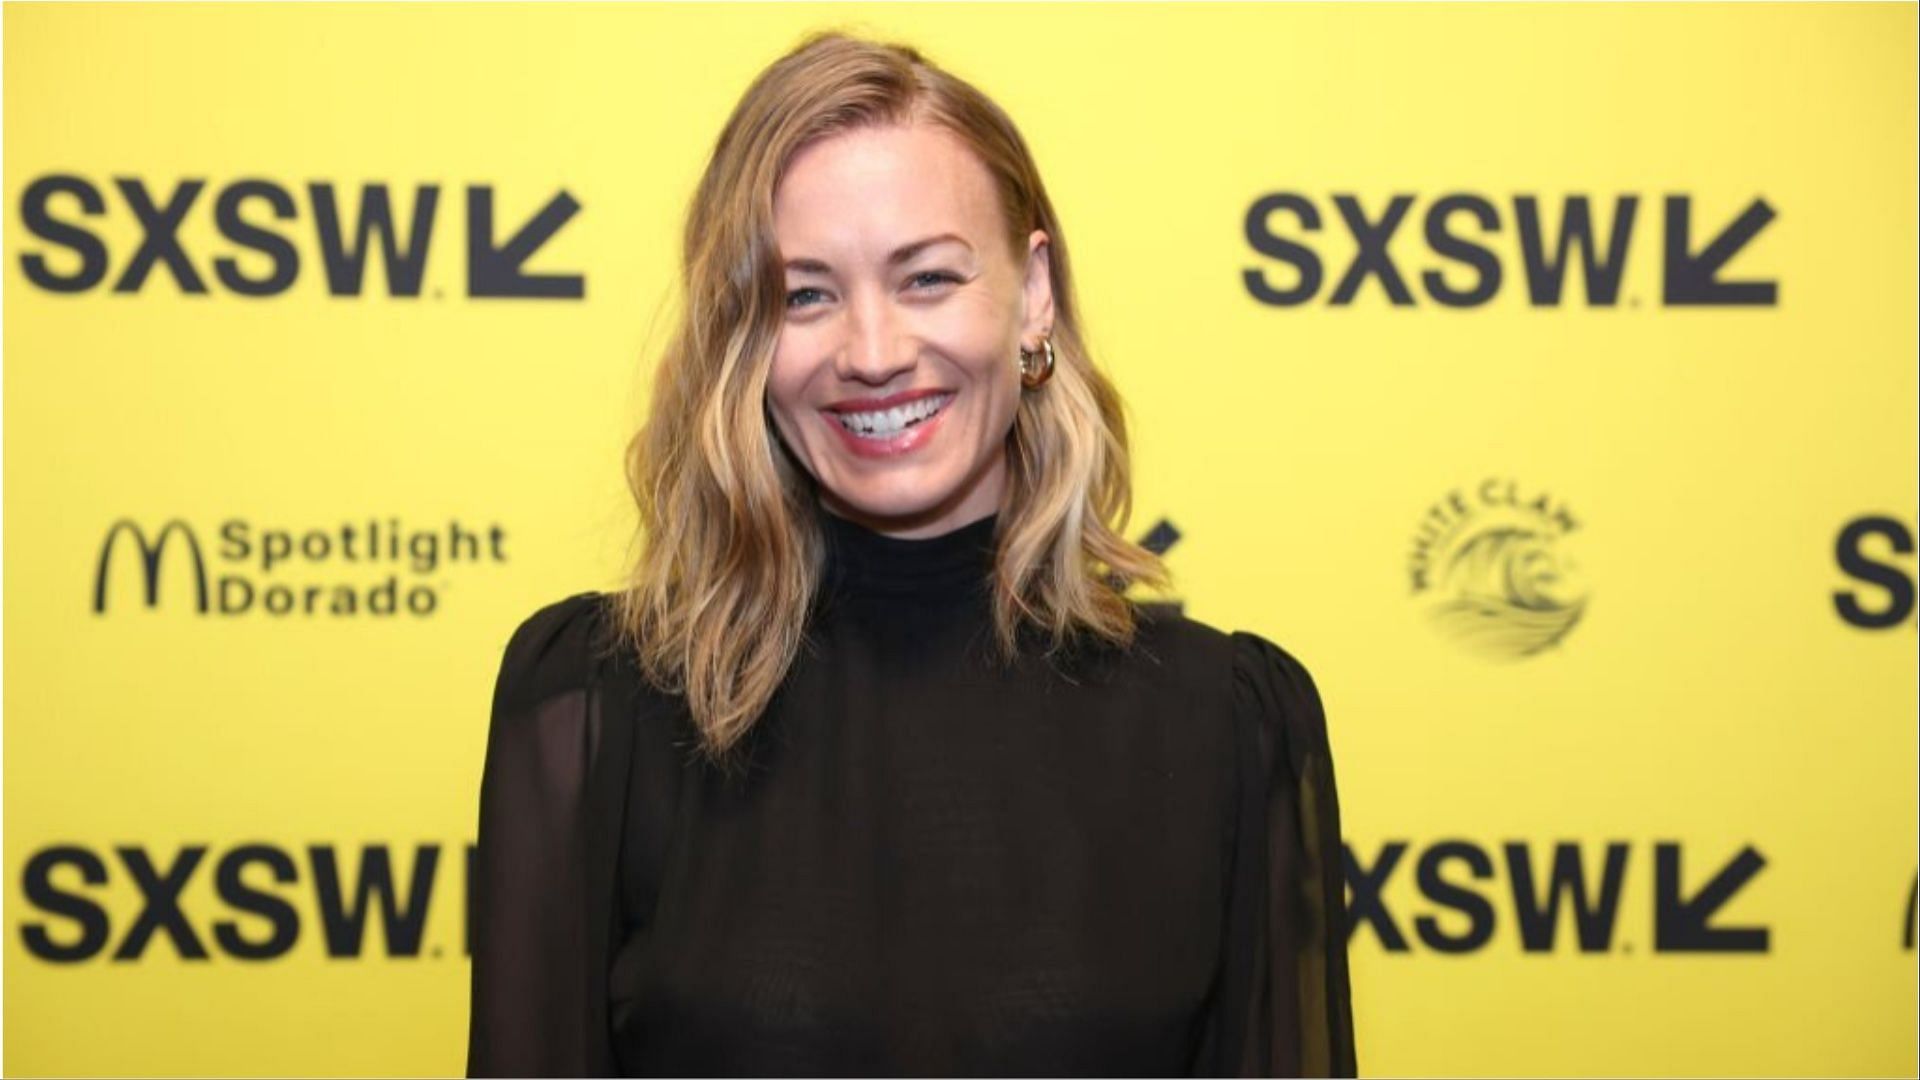 Yvonne Strahovski is expecting her third child (Image via Errich Petersen/Getty Images)